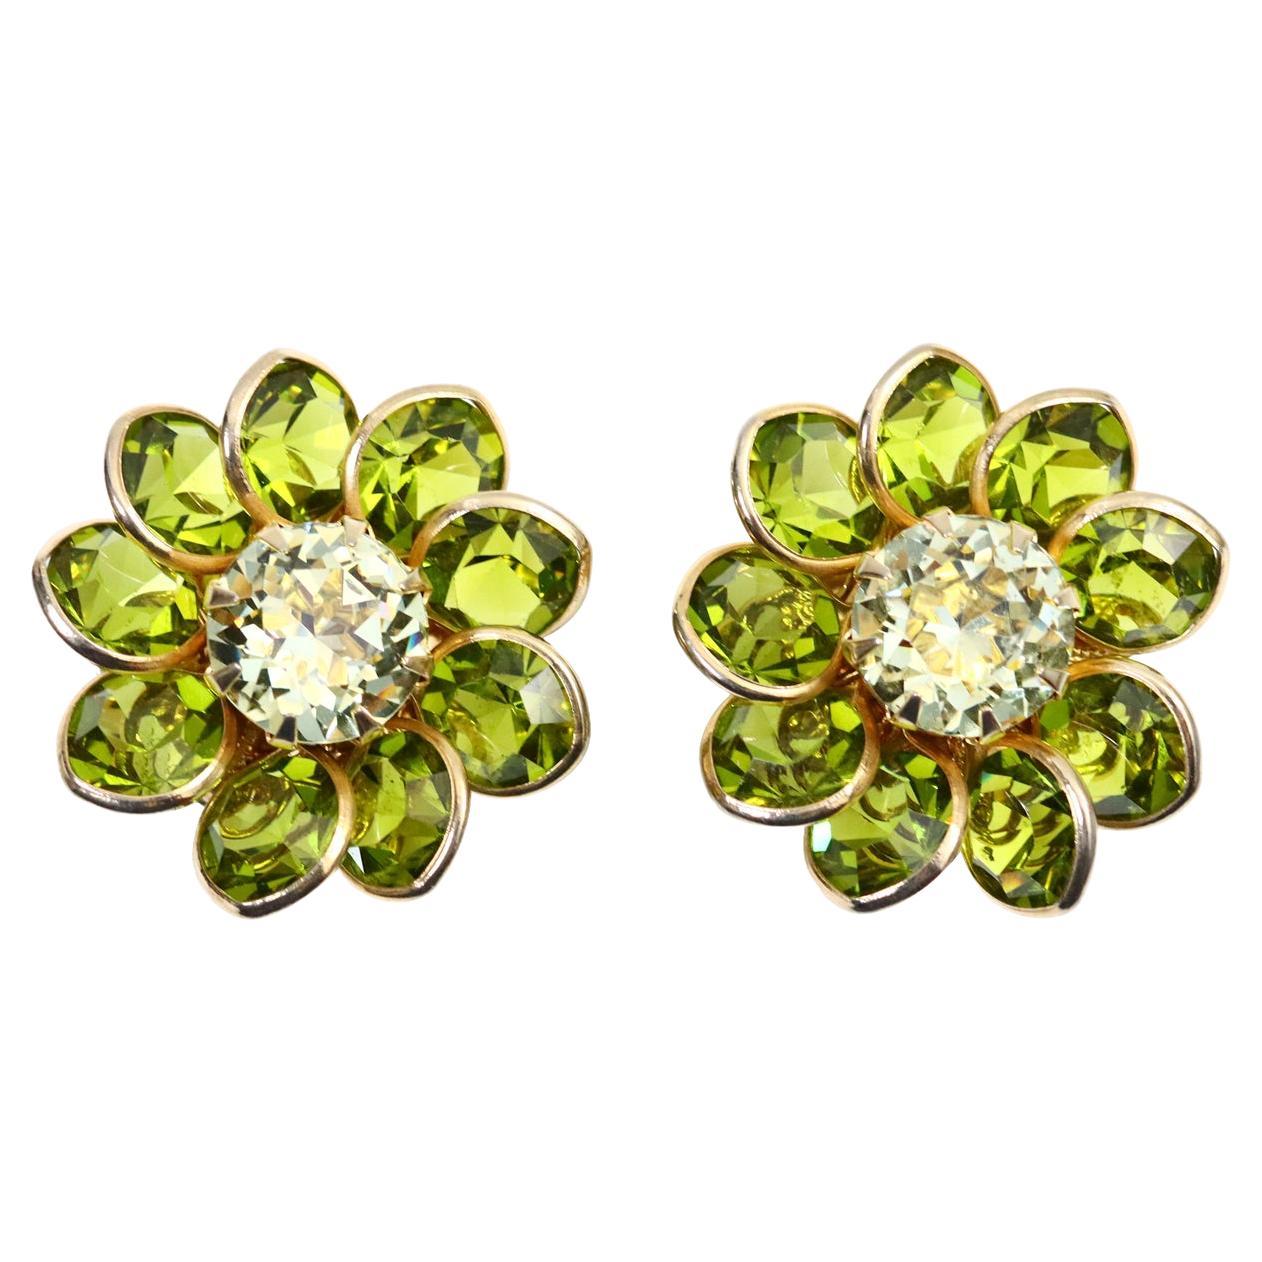 Vintage Poured Glass Gold Tone Green With Diamante Flower Earrings Circa 1960s